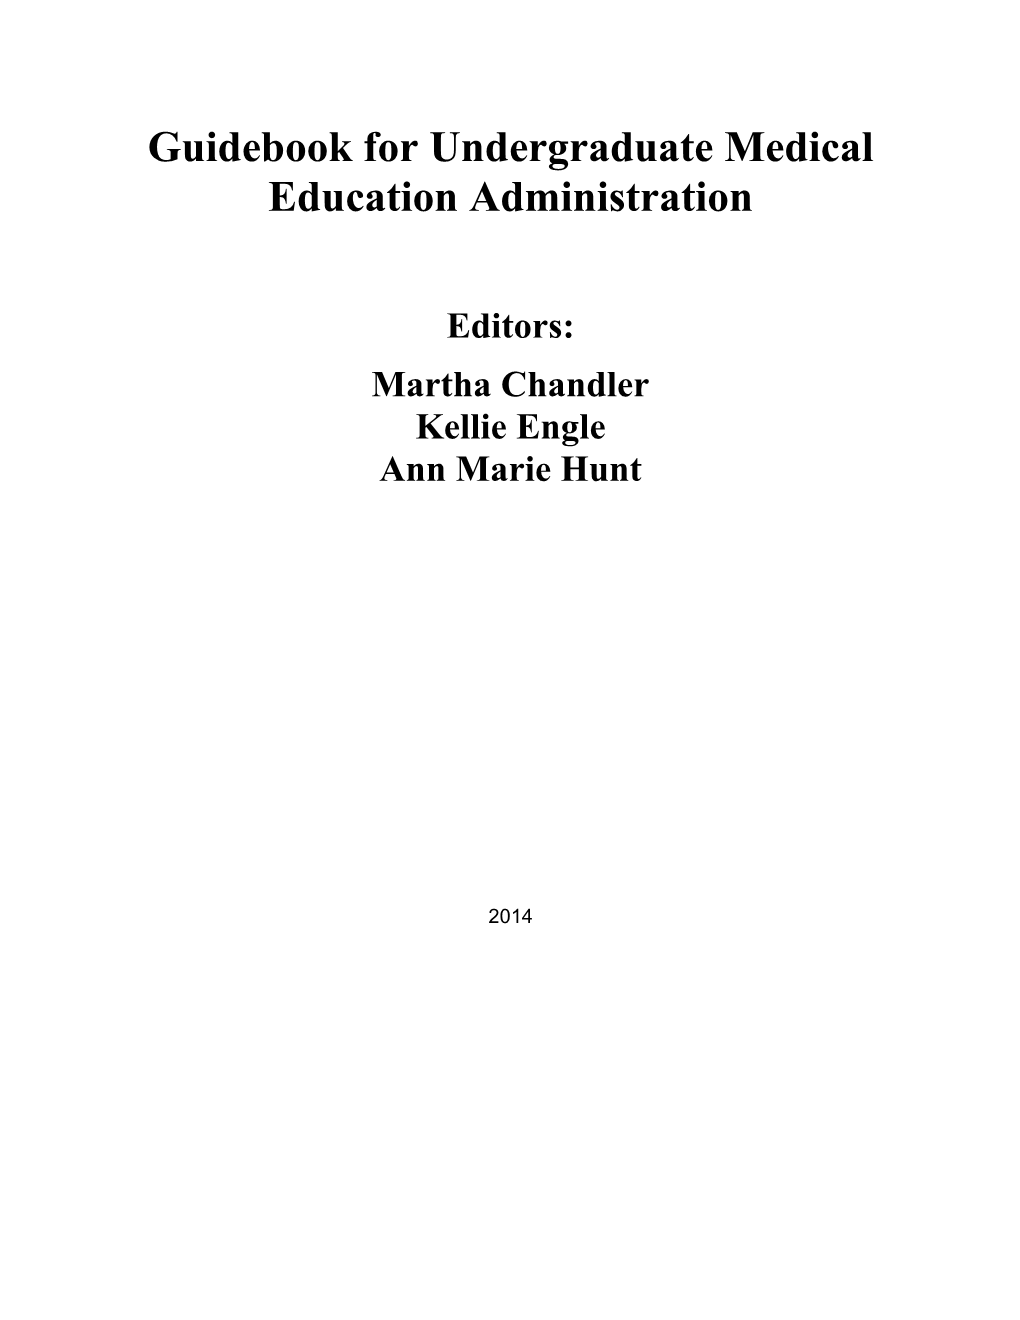 Guidebook for Undergraduate Medical Education Administration